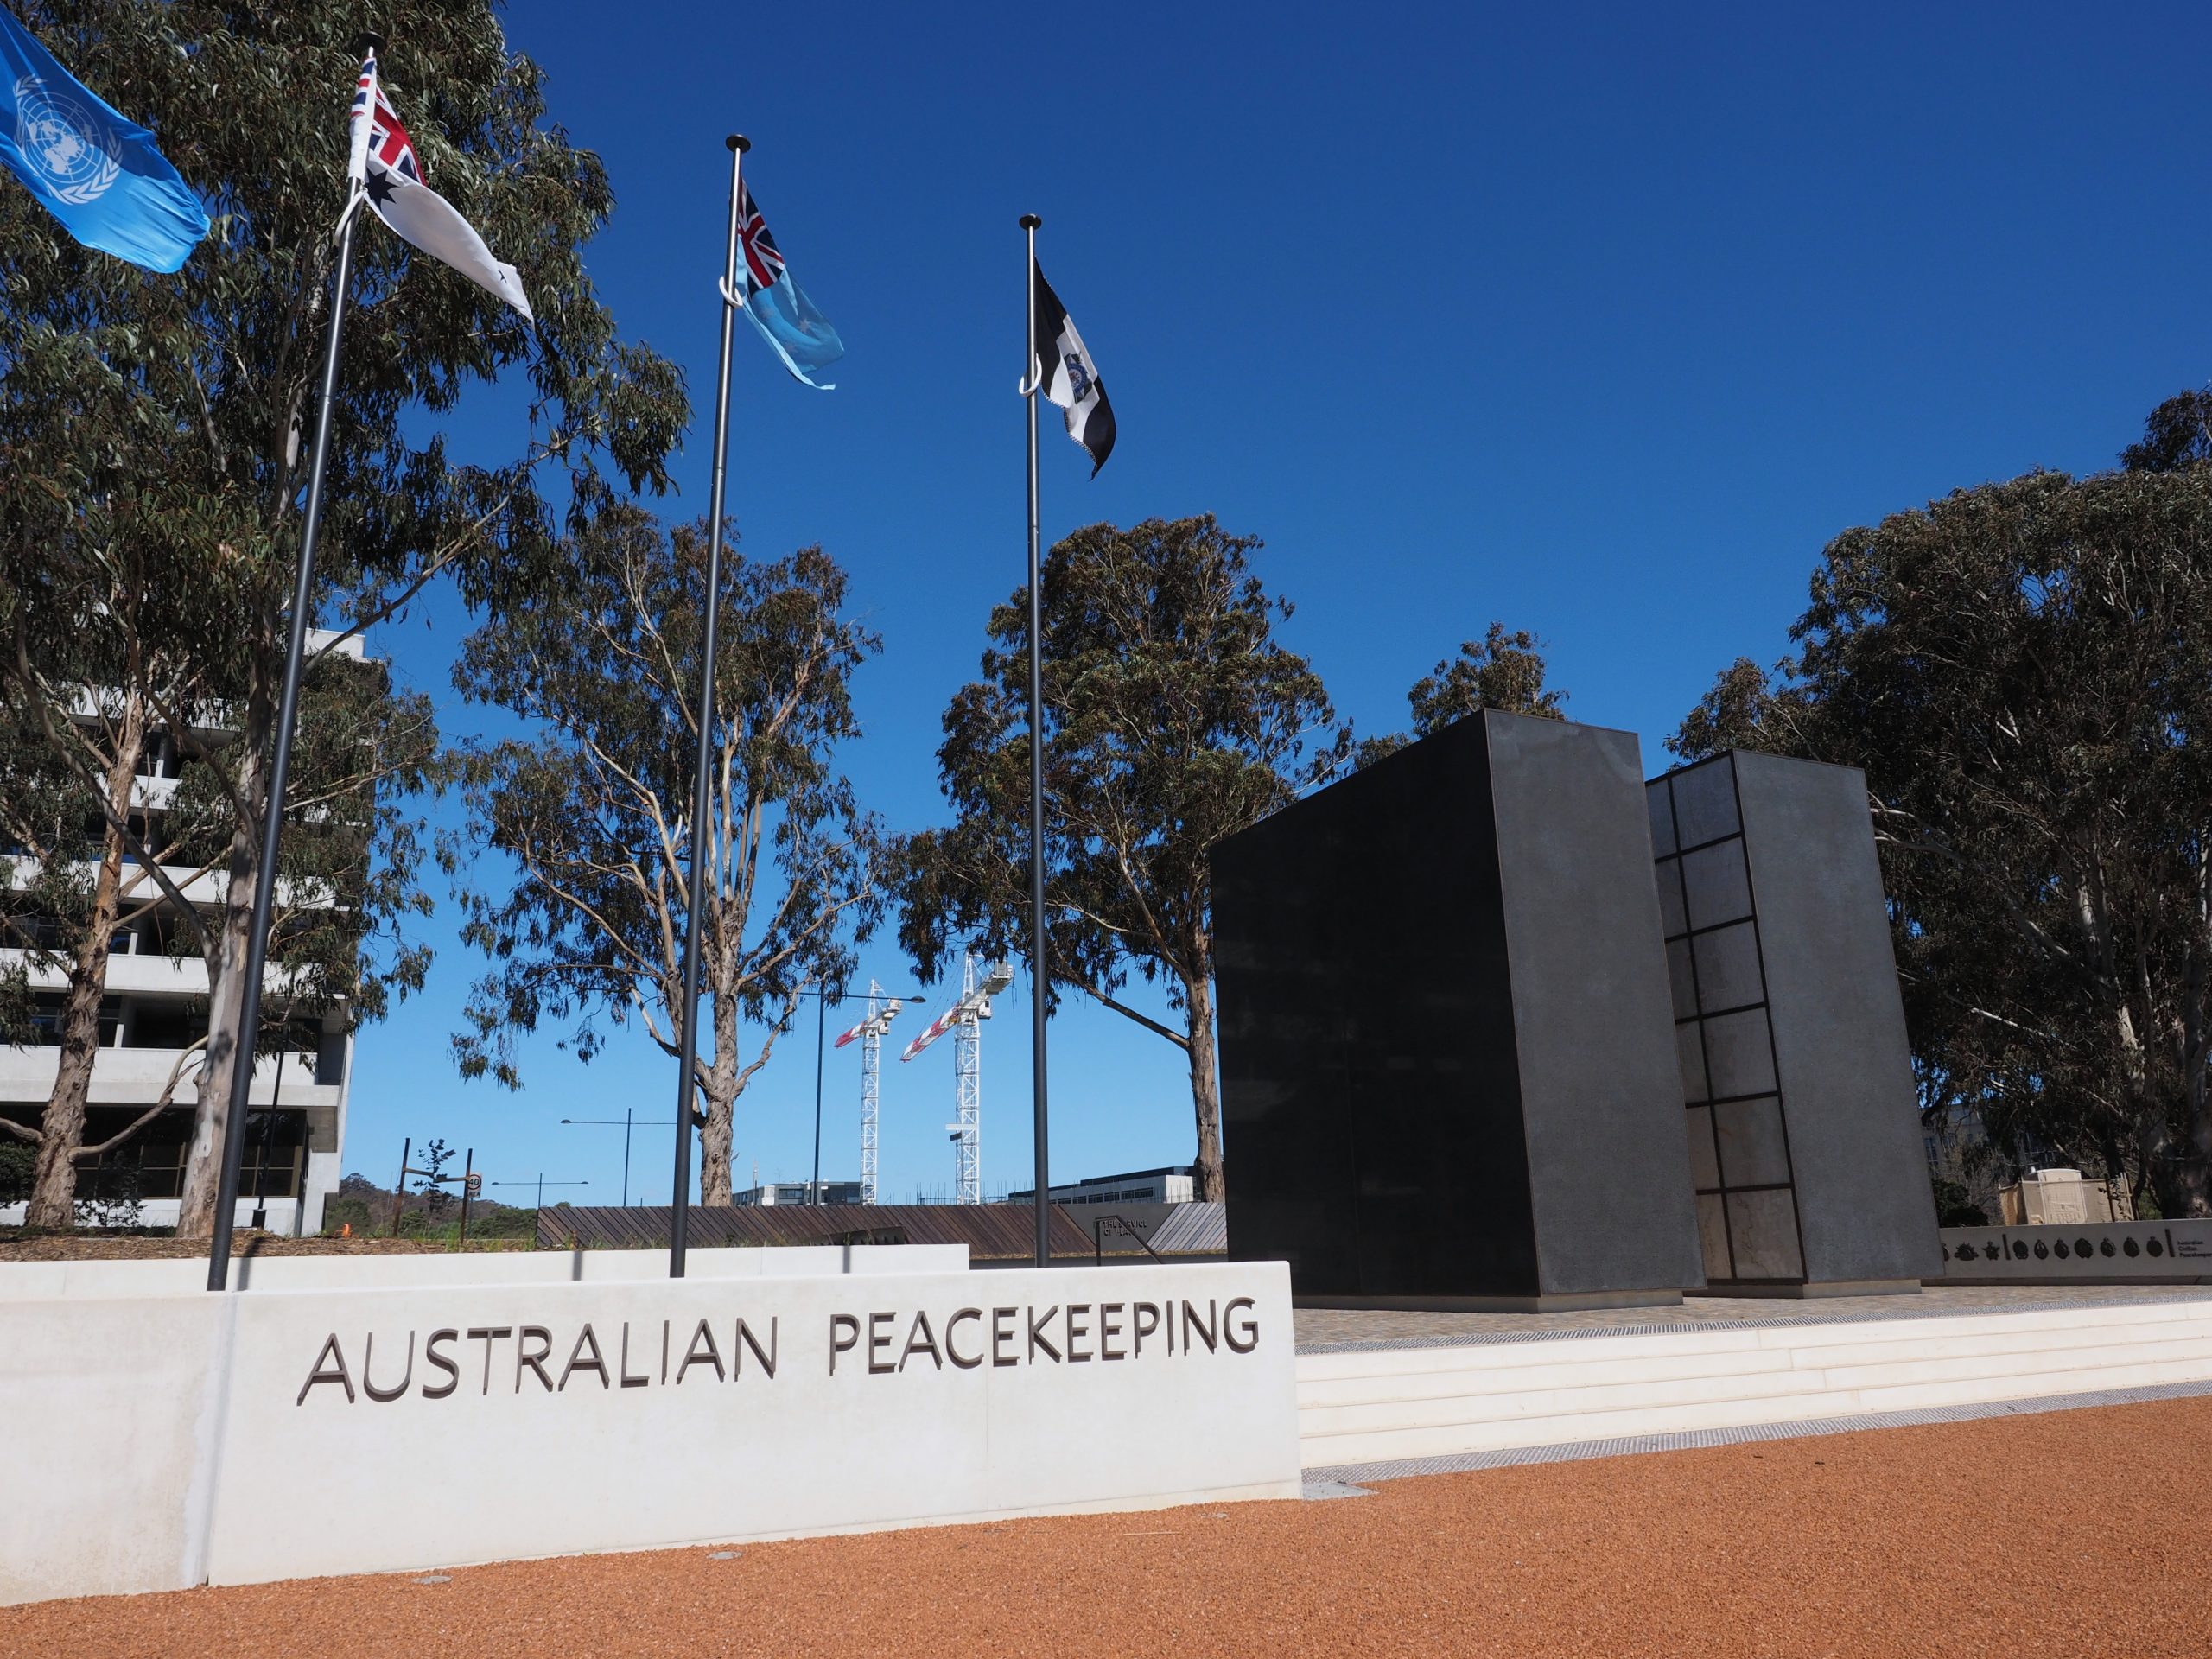 A general view of the Australian Peacekeeping Memorial, with flags rising from the ground.